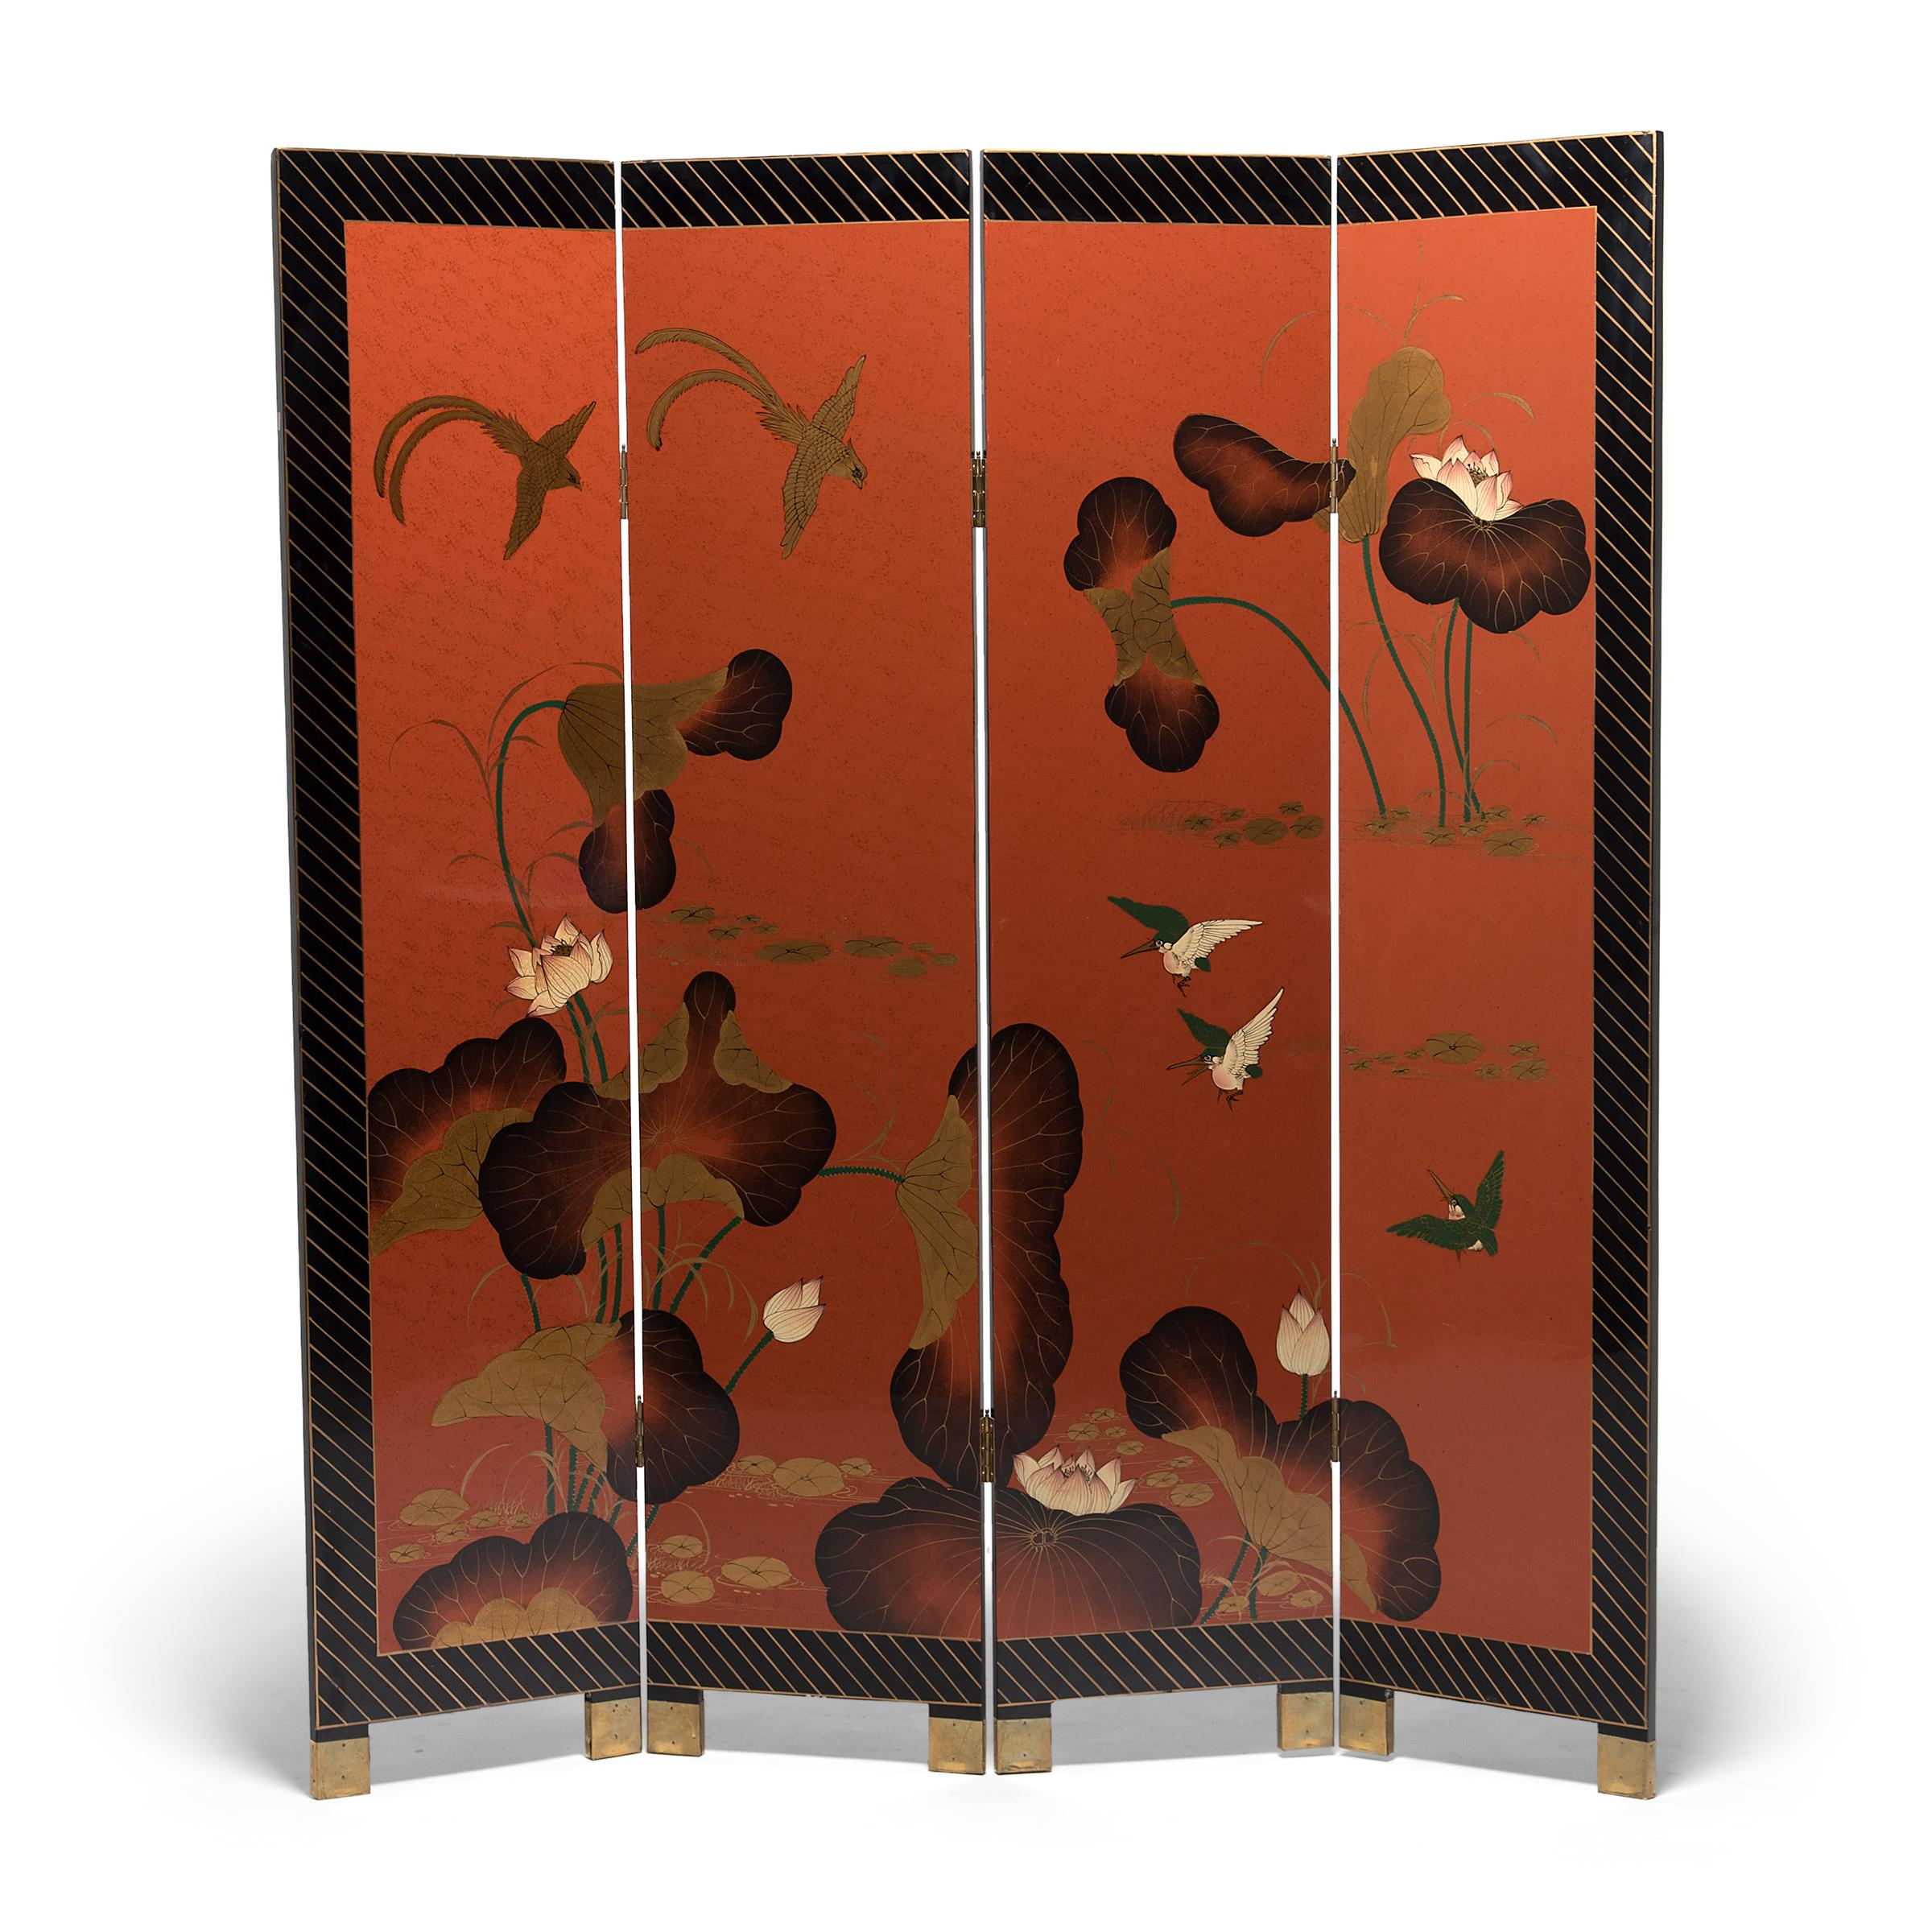 Used to partition a room and block unpleasant drafts, the standing screen has long been a fixture of Chinese and Japanese interiors. Carefully placed to instill harmony, a tall screen offered privacy and provided an expansive surface for fine